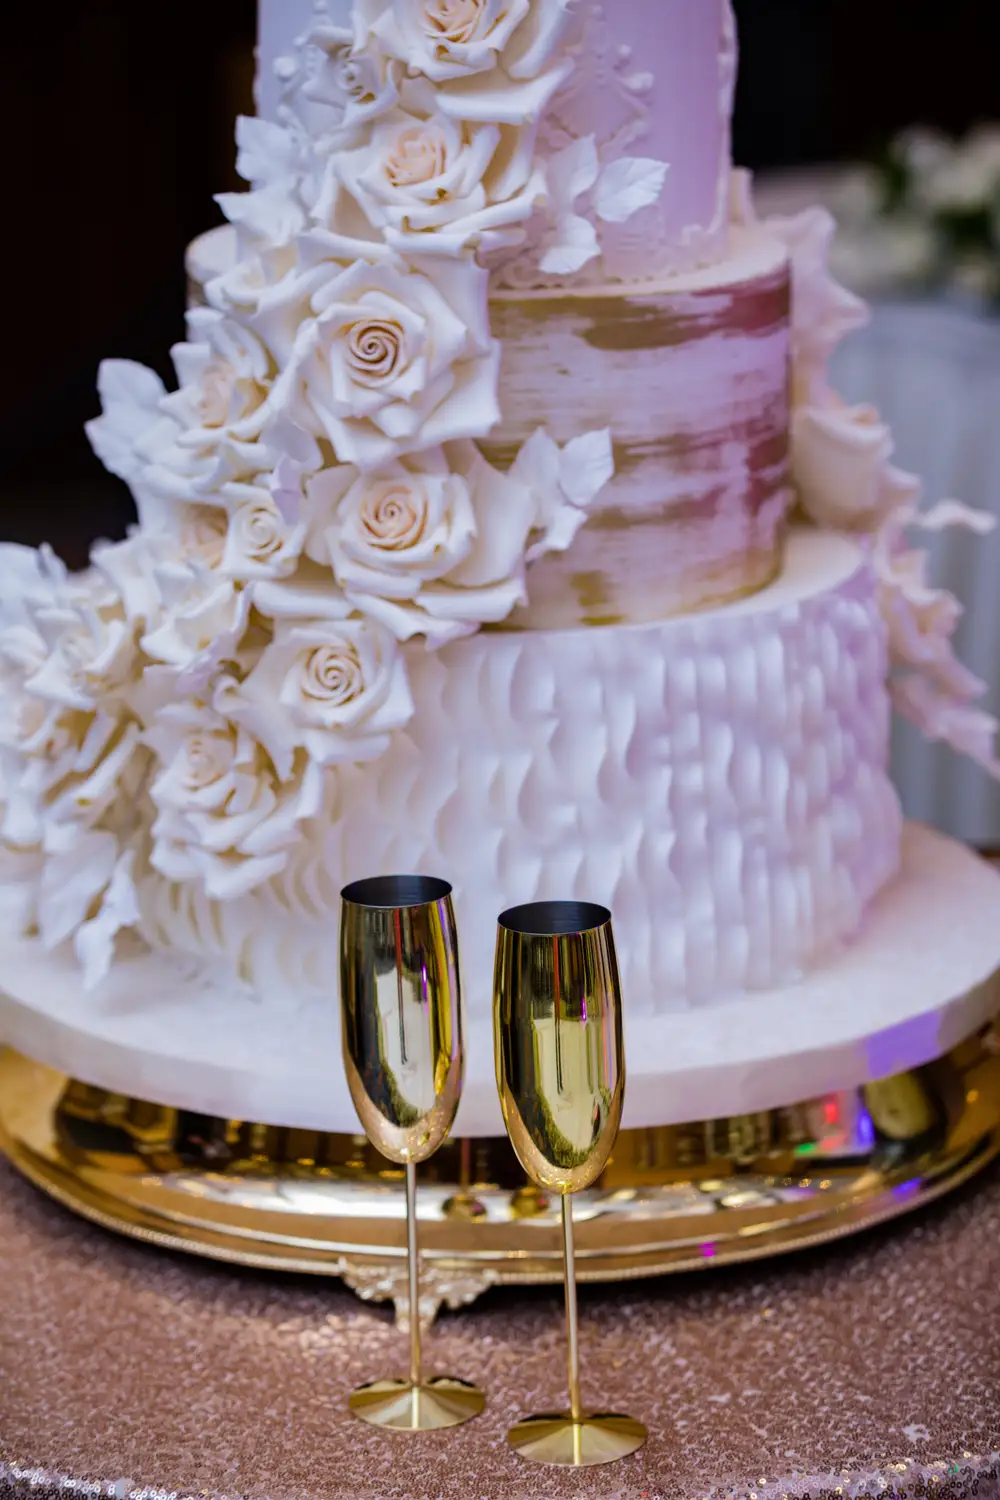 Wedding Cake with two golden cups